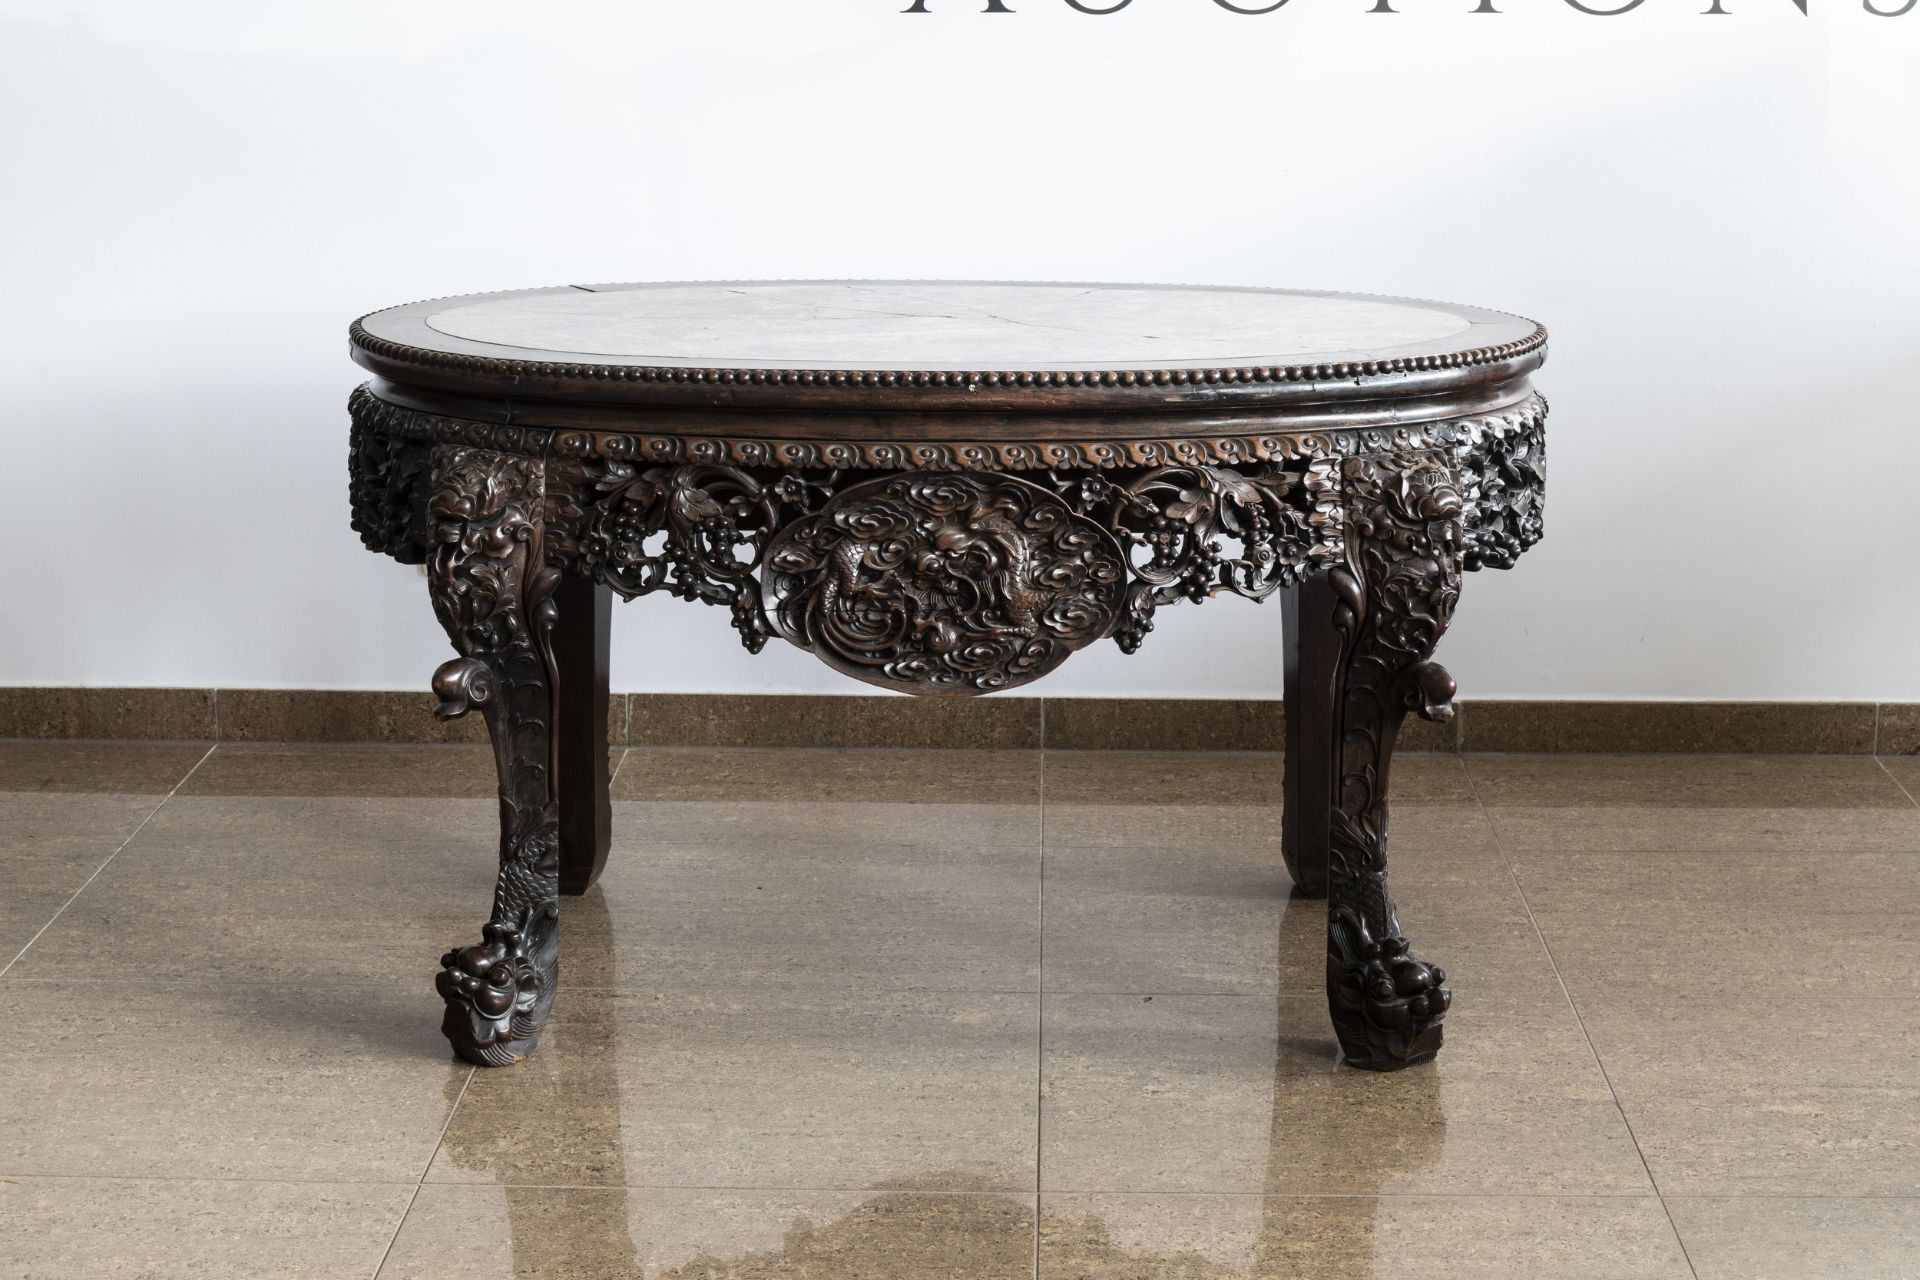 An oval Chinese finely carved wooden table with marble top, 19th C. - Image 4 of 6